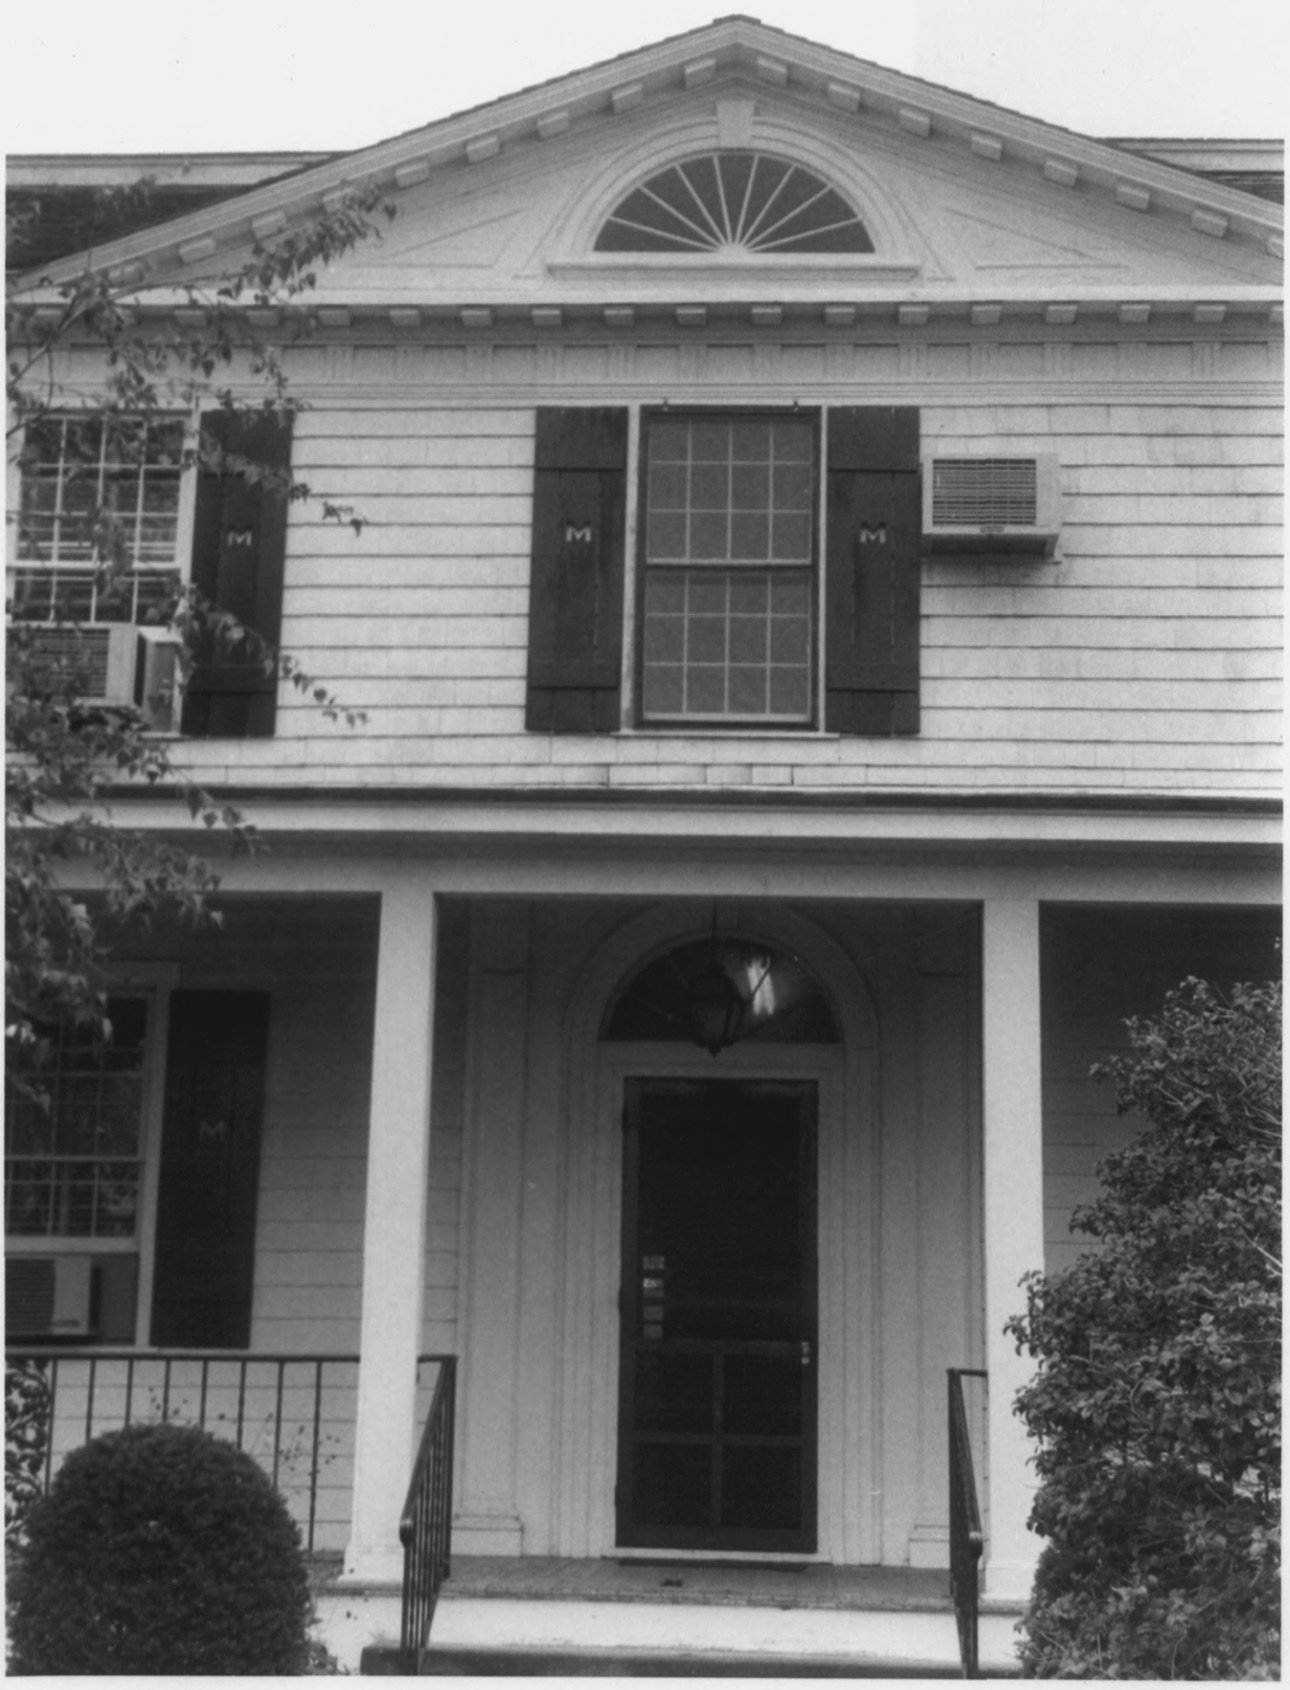 Front Door of the Cove House in 1979 by D. Ransom, Part of the NPS NRHP Photographic Collection on the Cove House